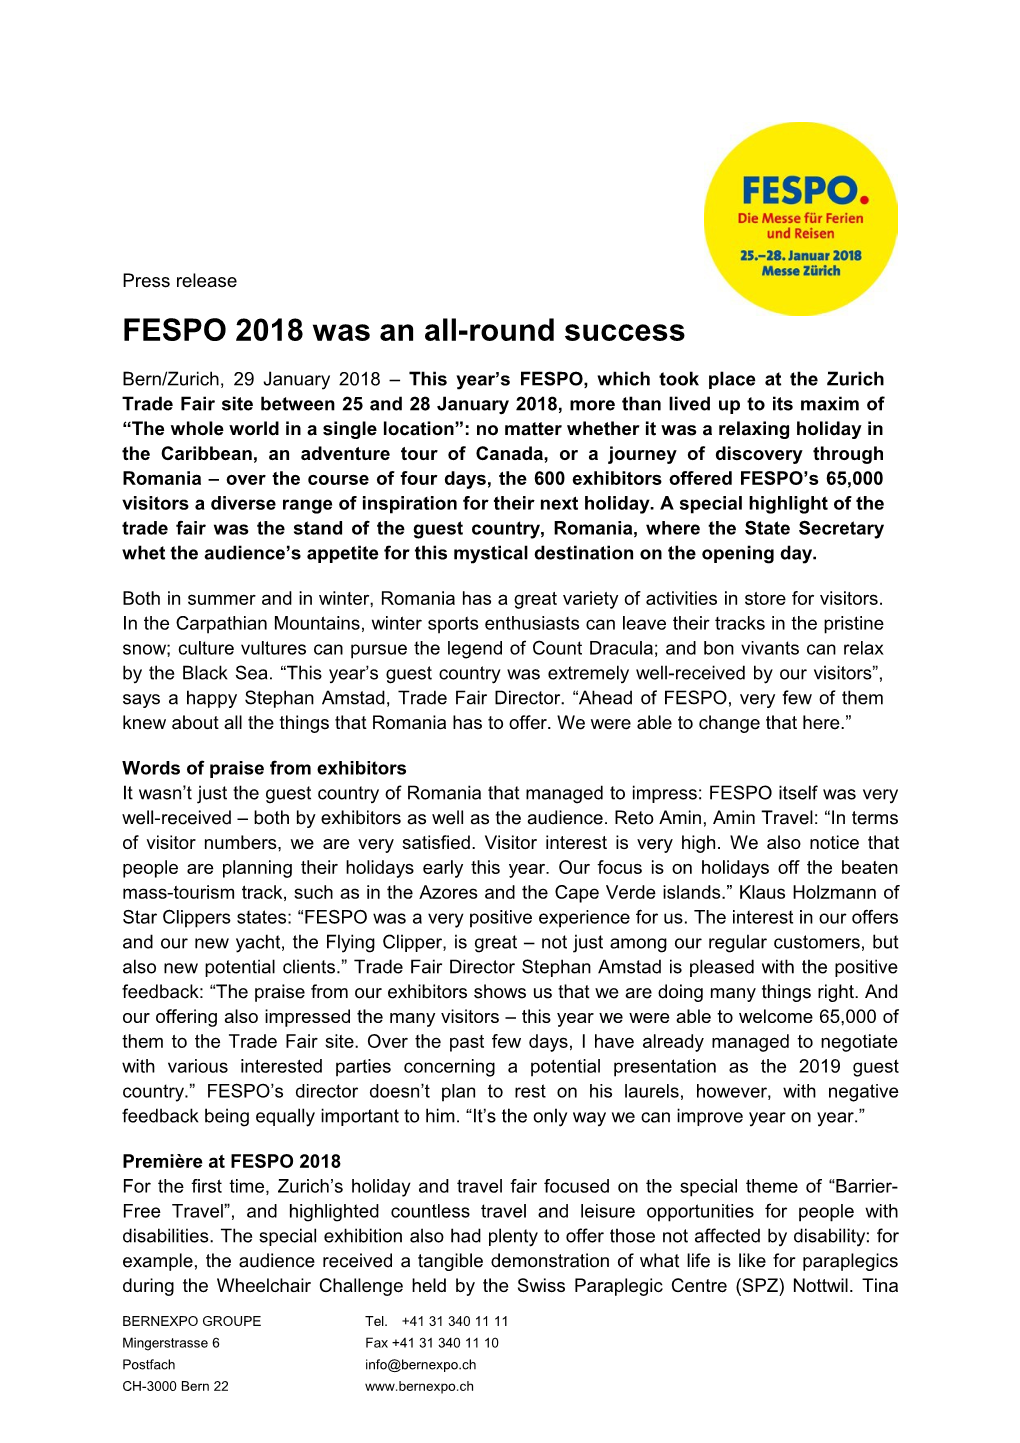 FESPO 2018 Was an All-Round Success